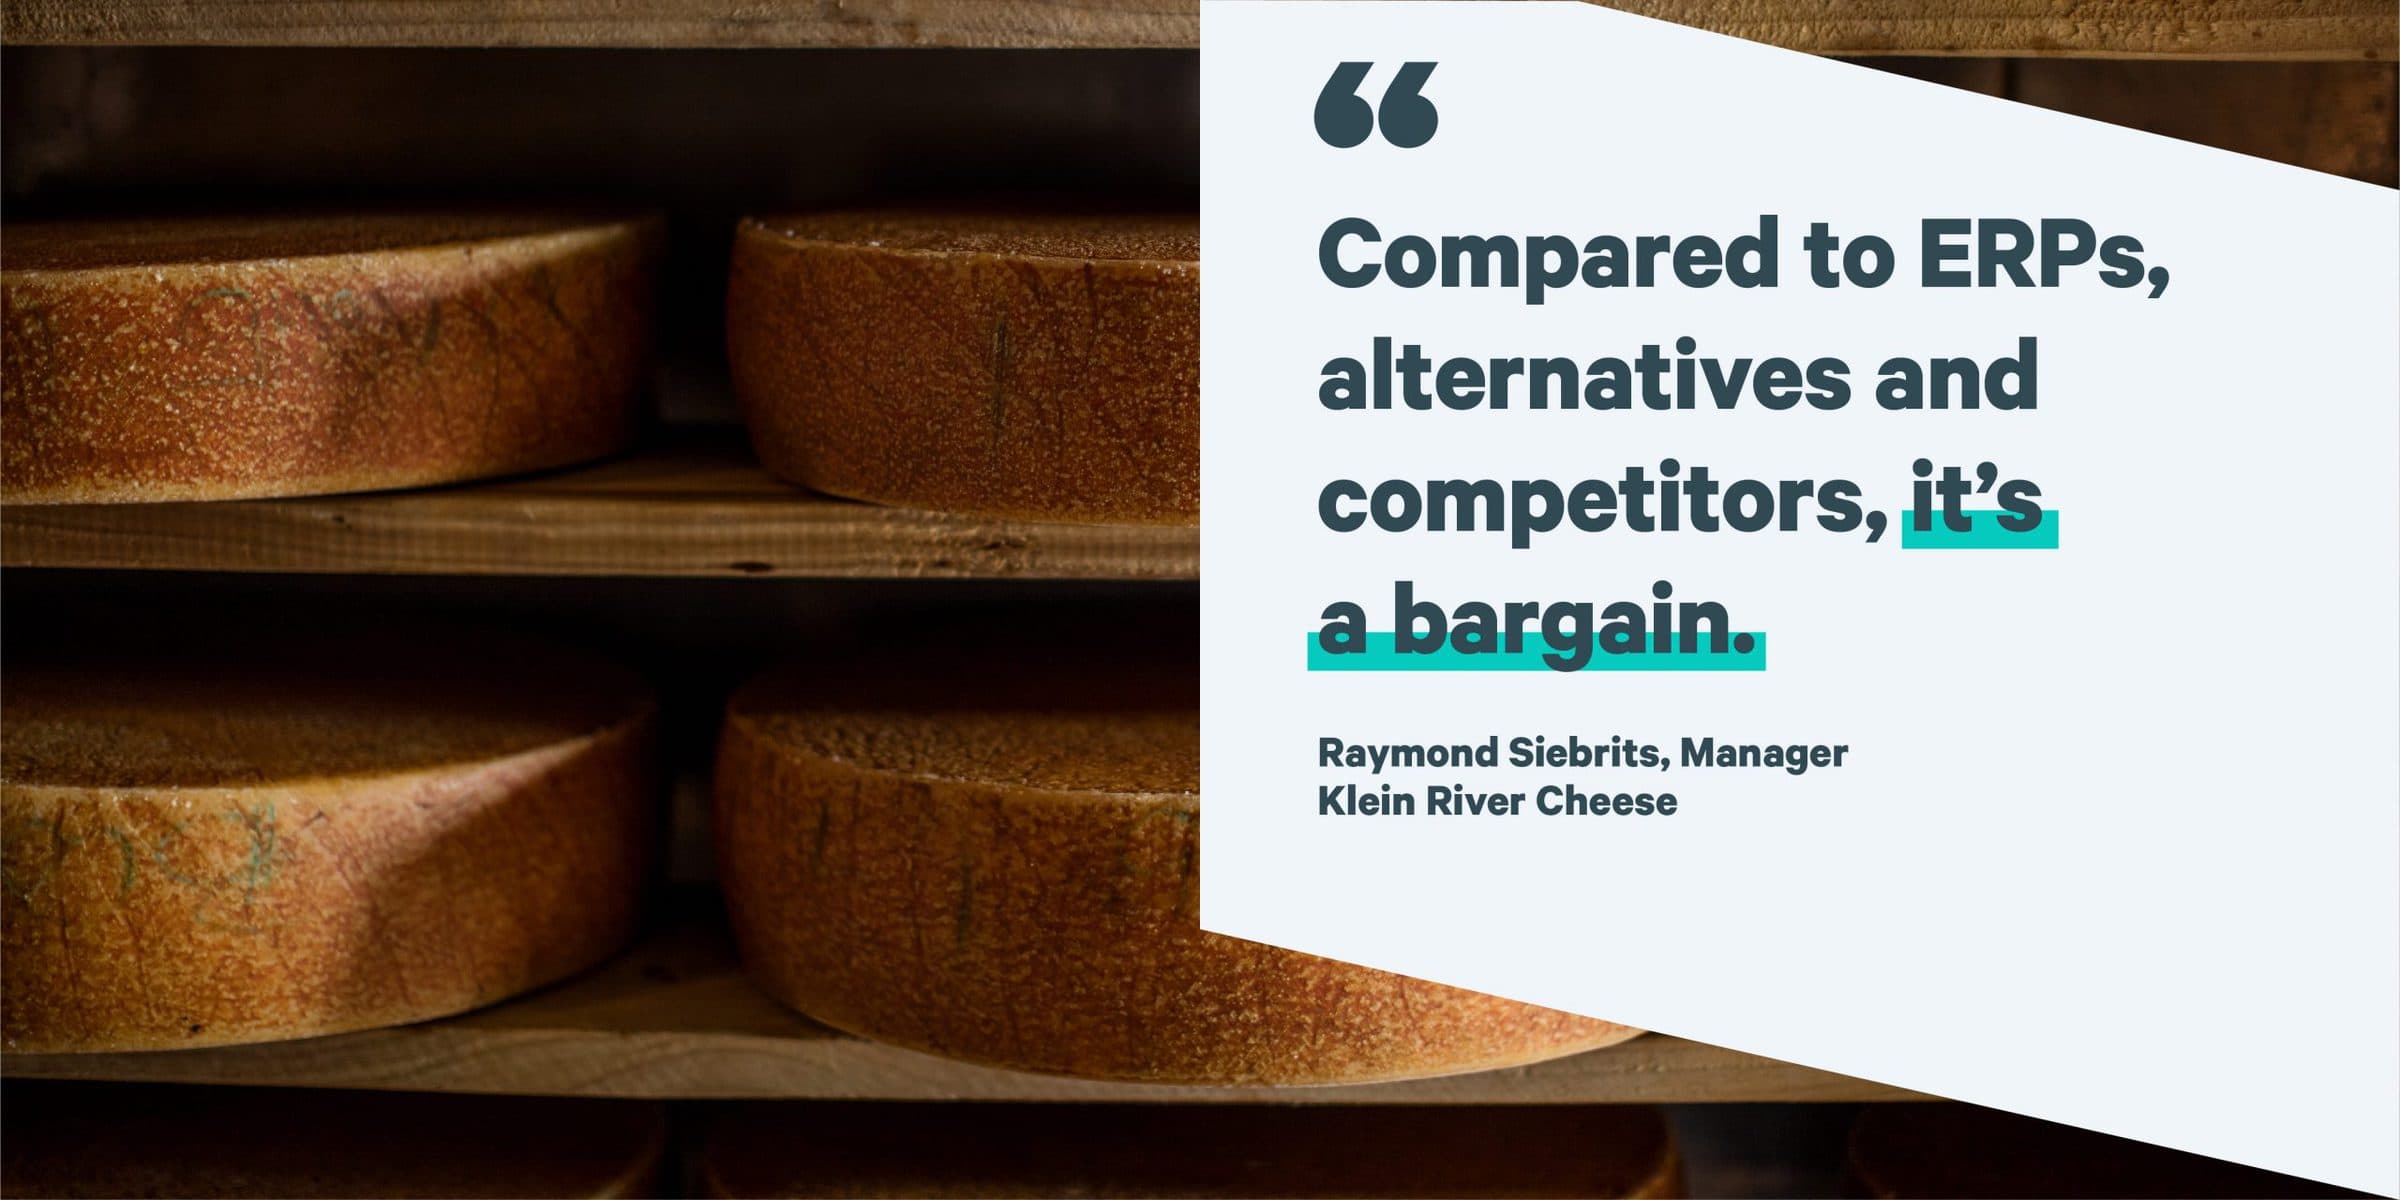 Customer Story - Klein River Cheese